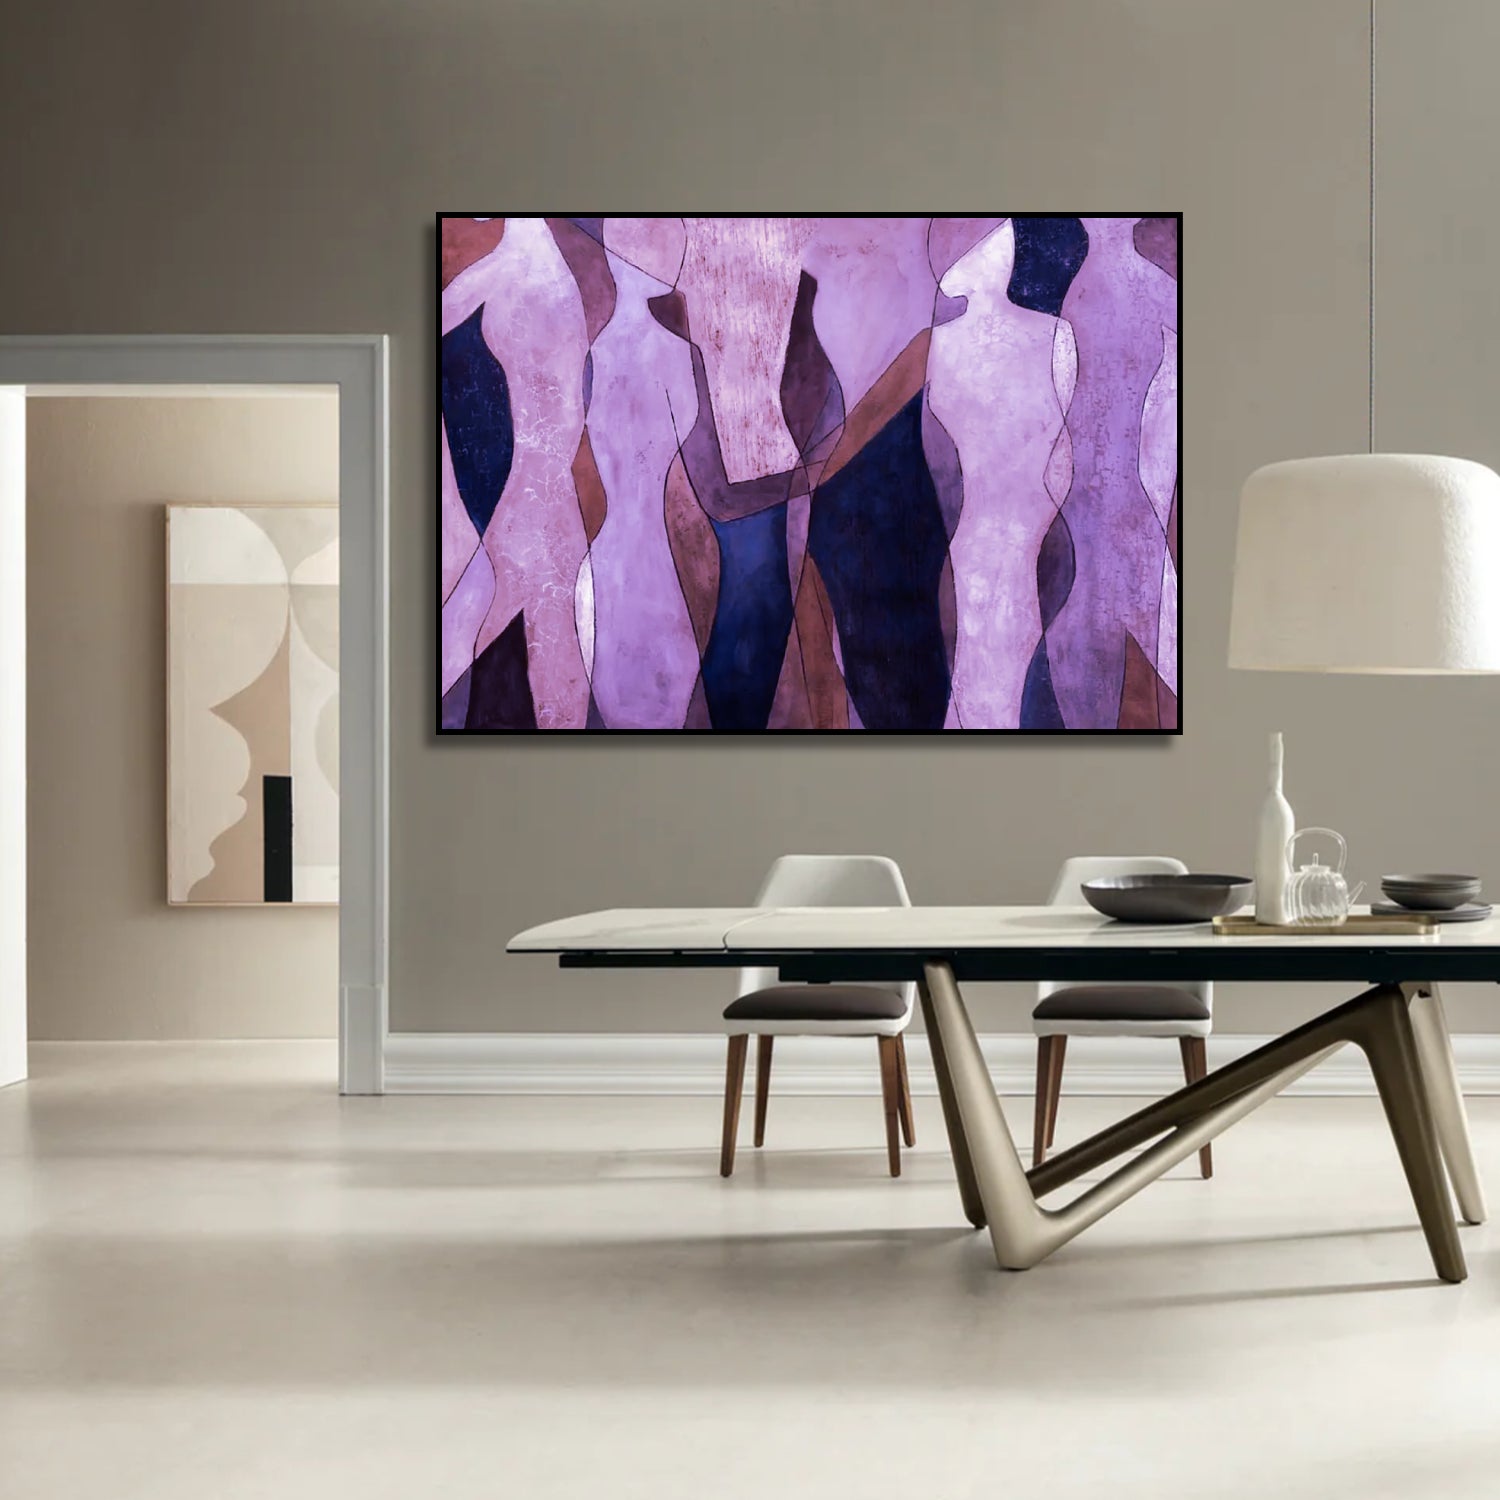 Abstract Pink and Purple Dancing Figures Painting